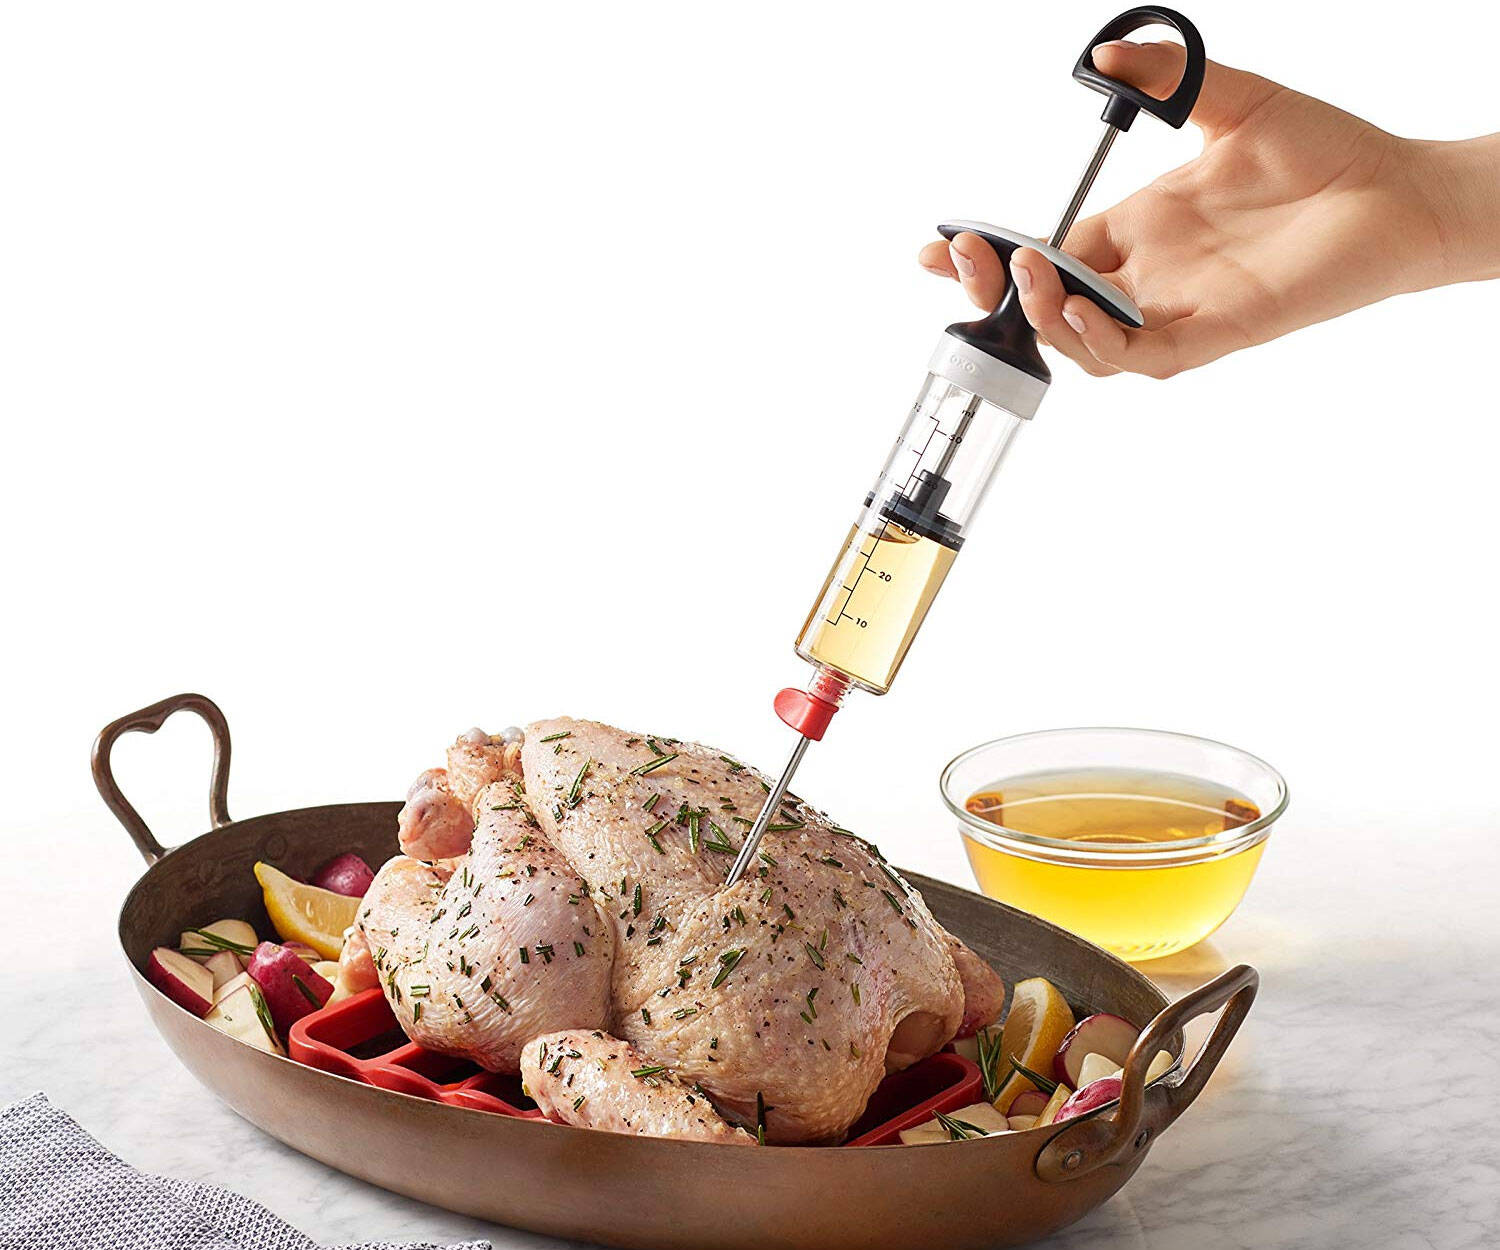 Easy To Use Meat & Poultry Injector - //coolthings.us